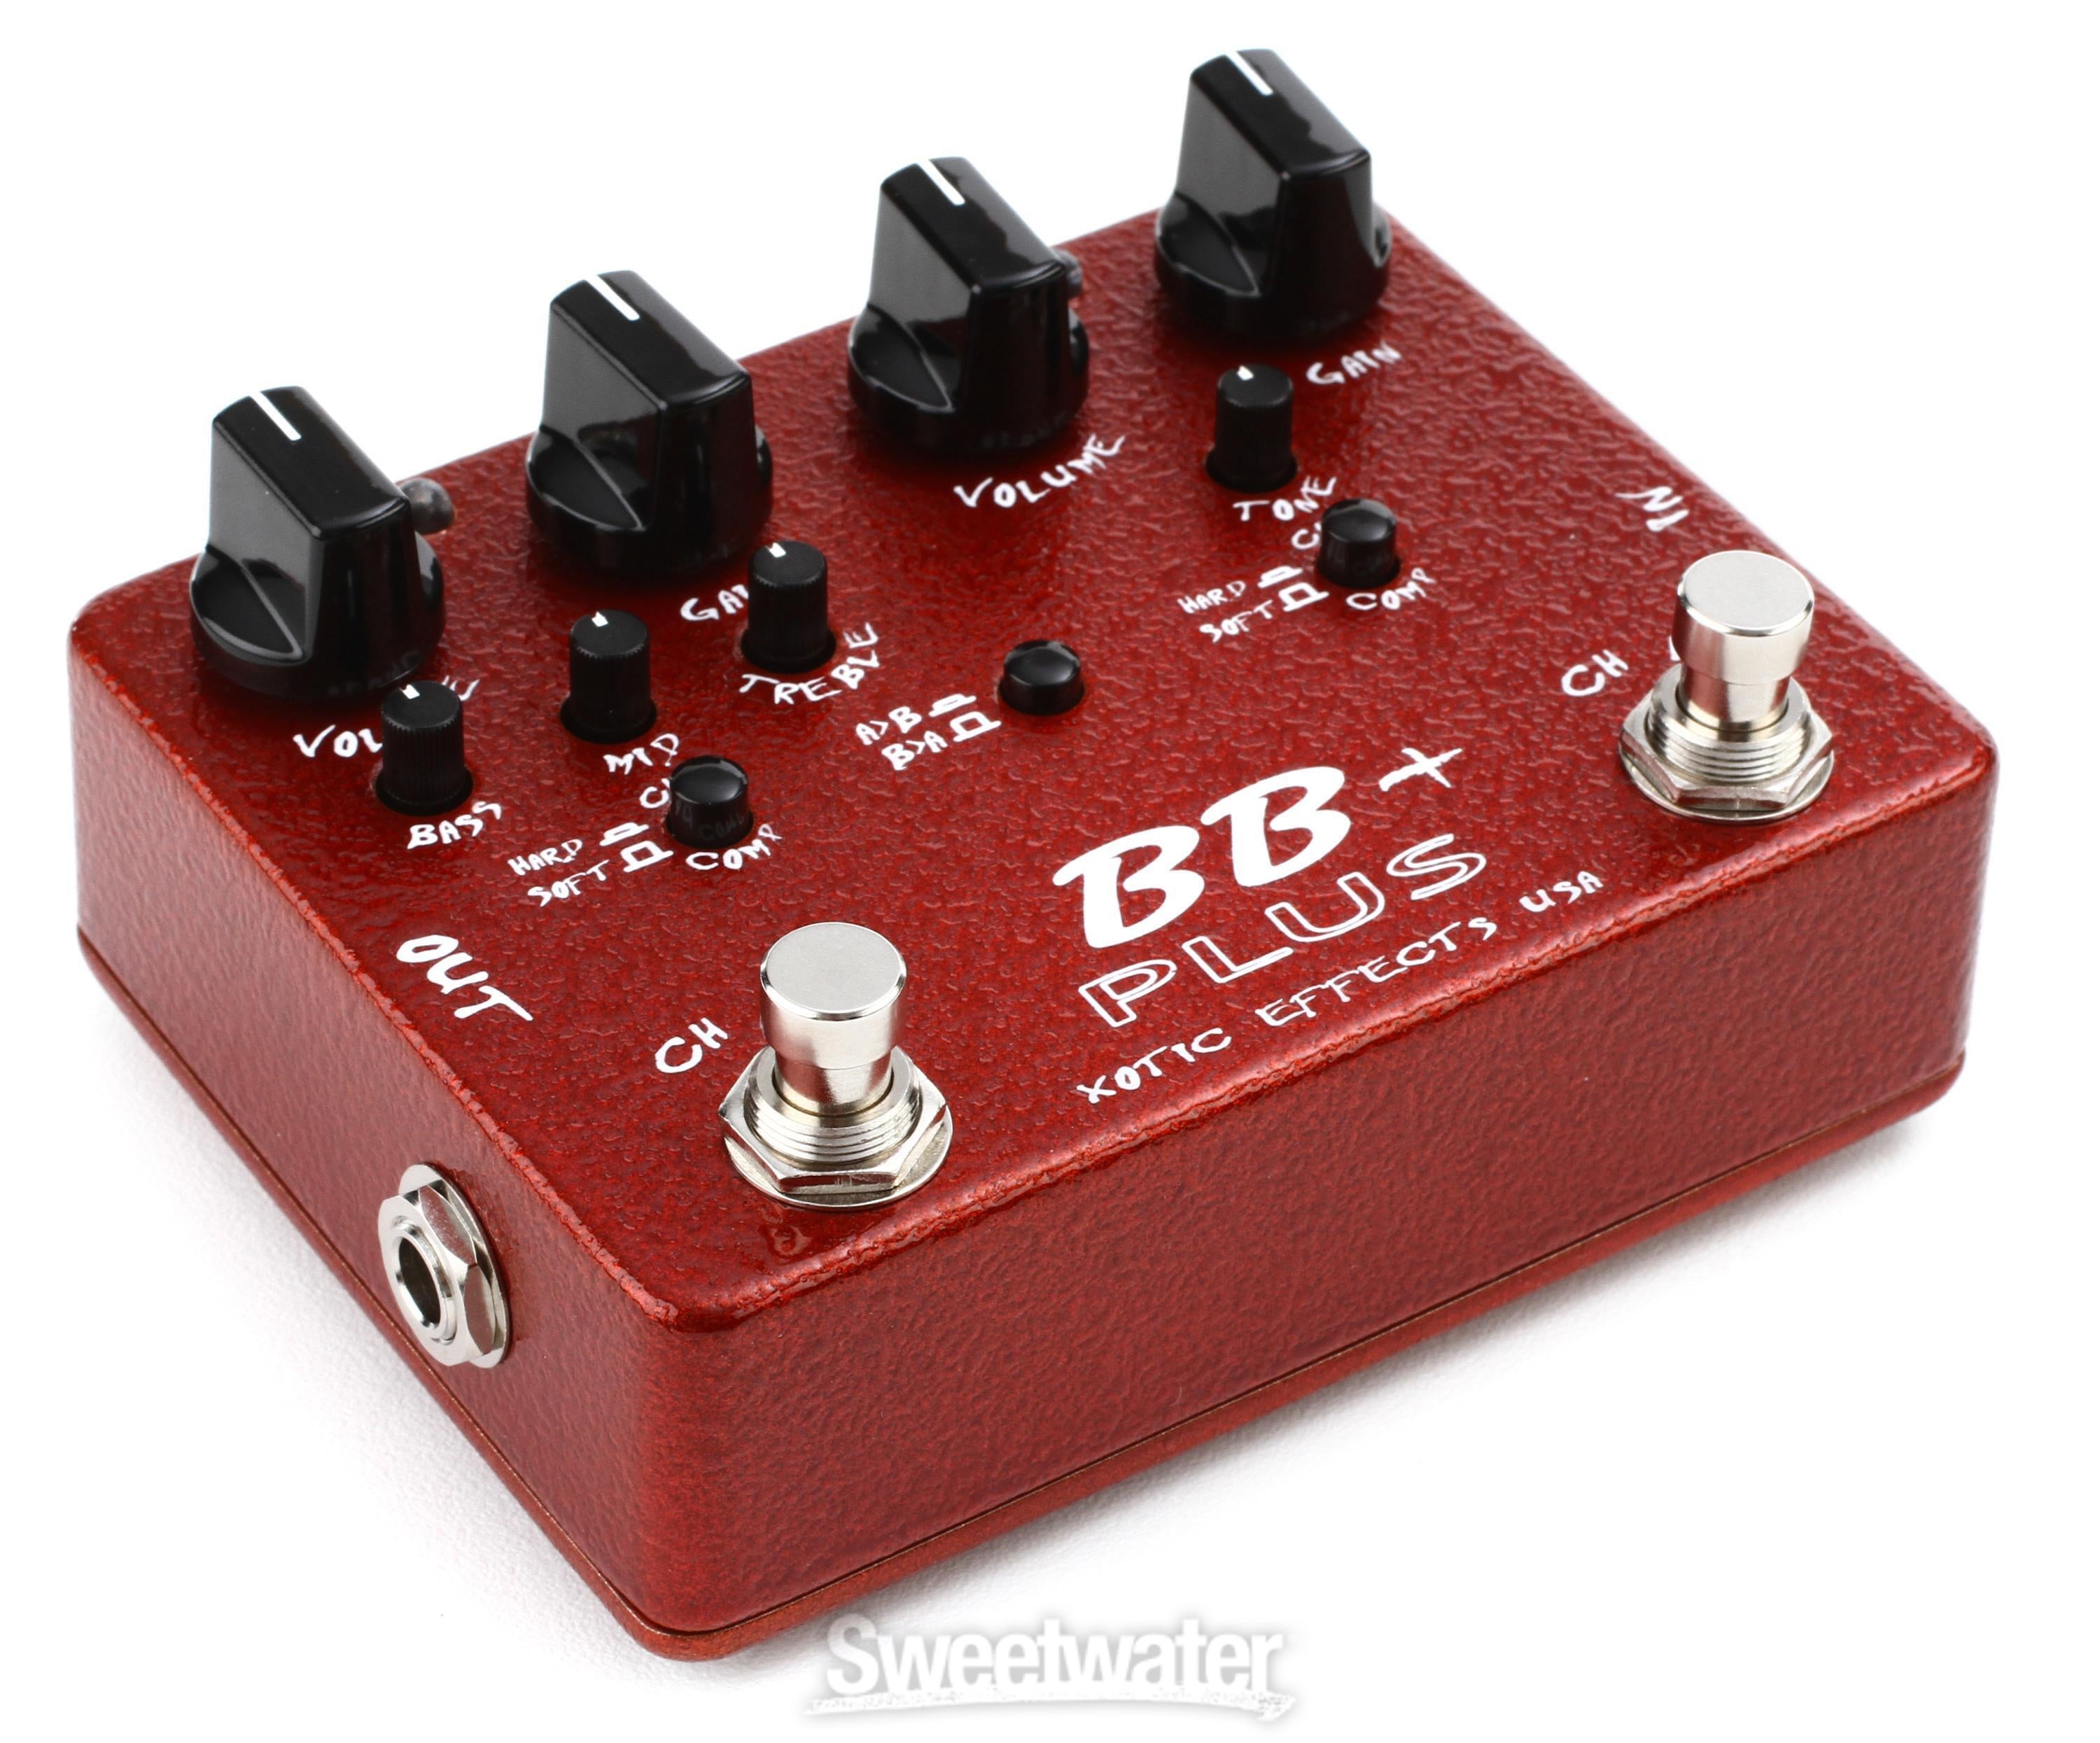 BB preamp/Xotic effects usa